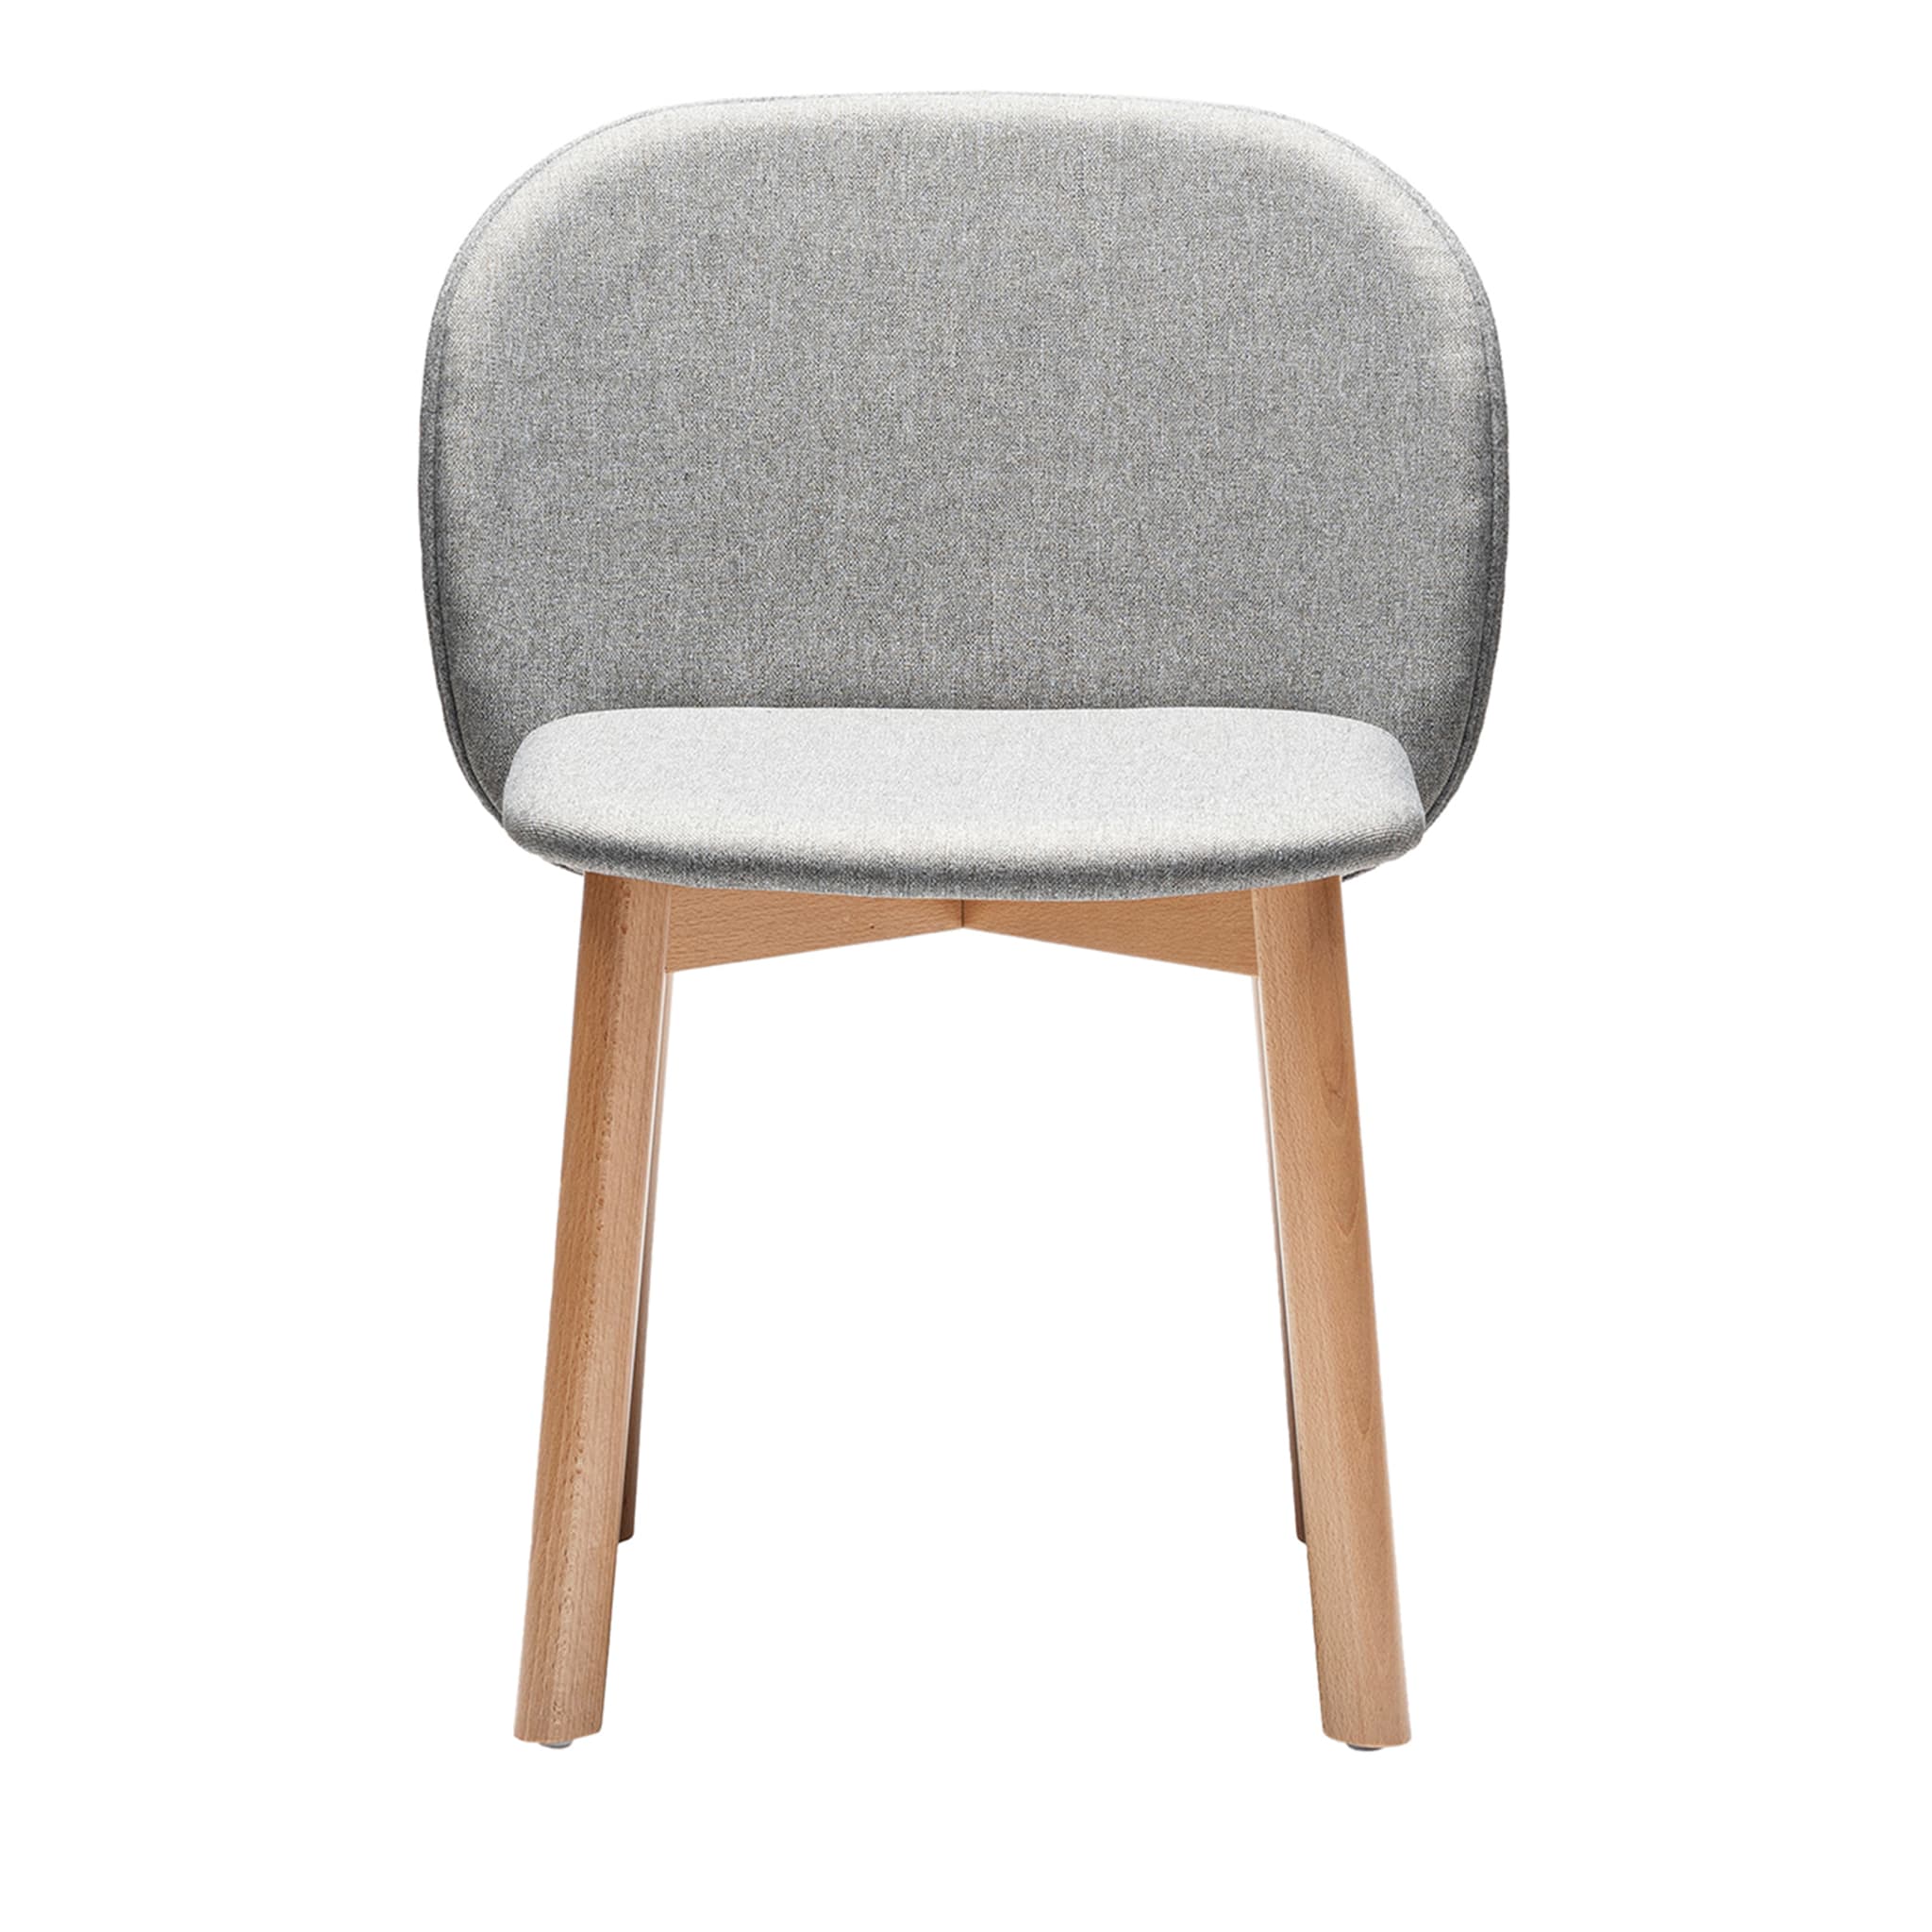 Chips S gray Chair by Studio Pastina - Main view